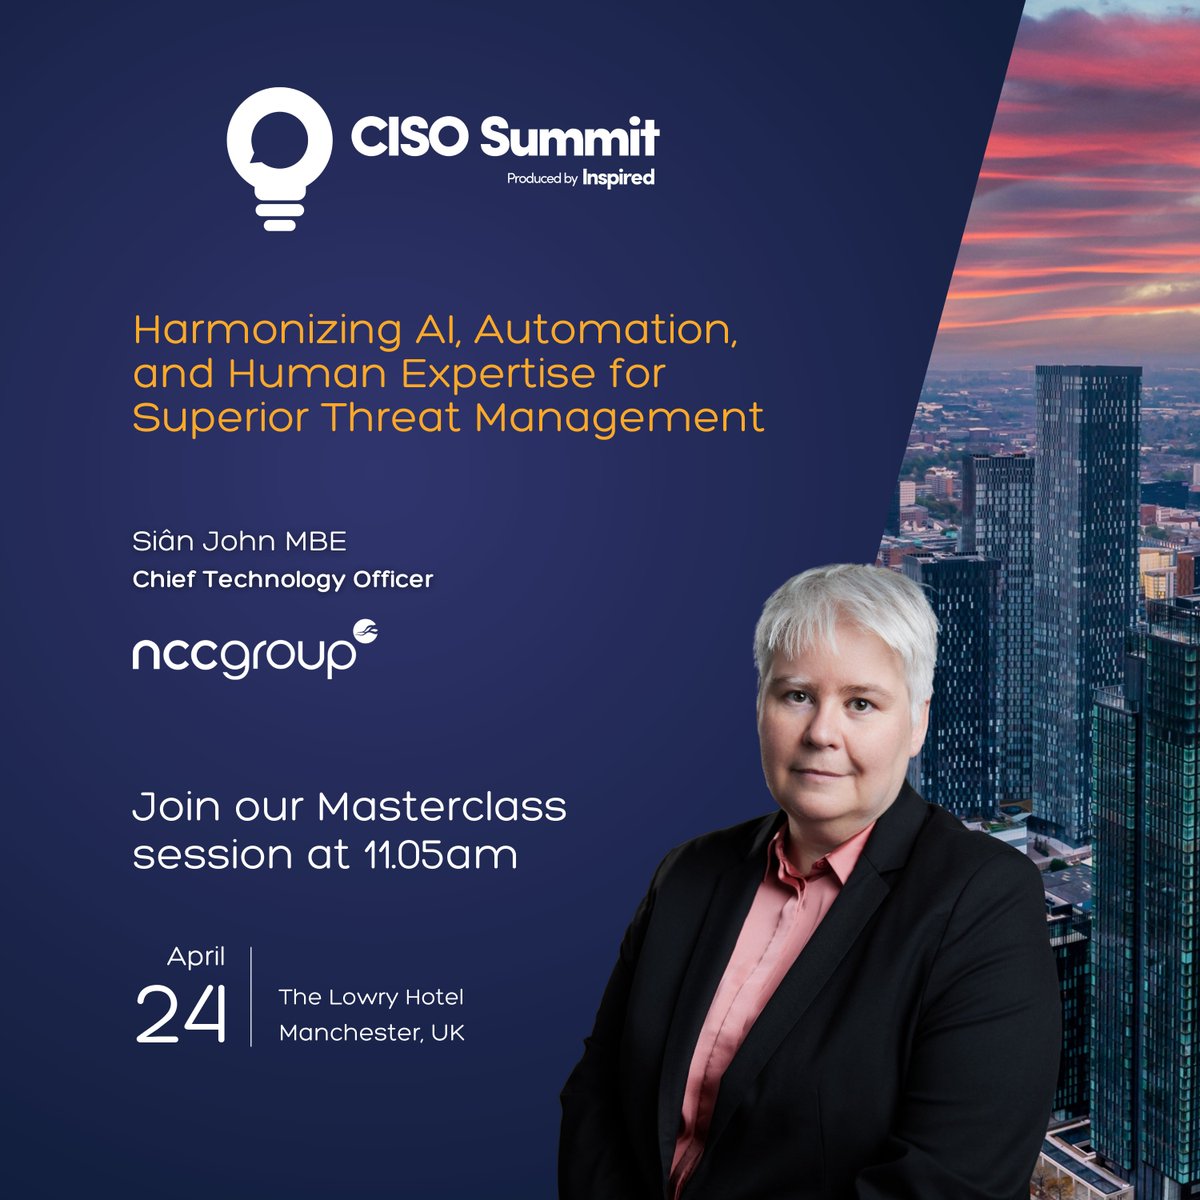 📢 Announcement: NCC Group’s CISO Summit Masterclass - 11.05am Wednesday 24th April, Manchester (UK). Join our CTO, Sian John, as she explores the intricate world of threat management in the age of #AI and evolving #CyberRegulations. 🔍Learn more: bit.ly/ncc1spi